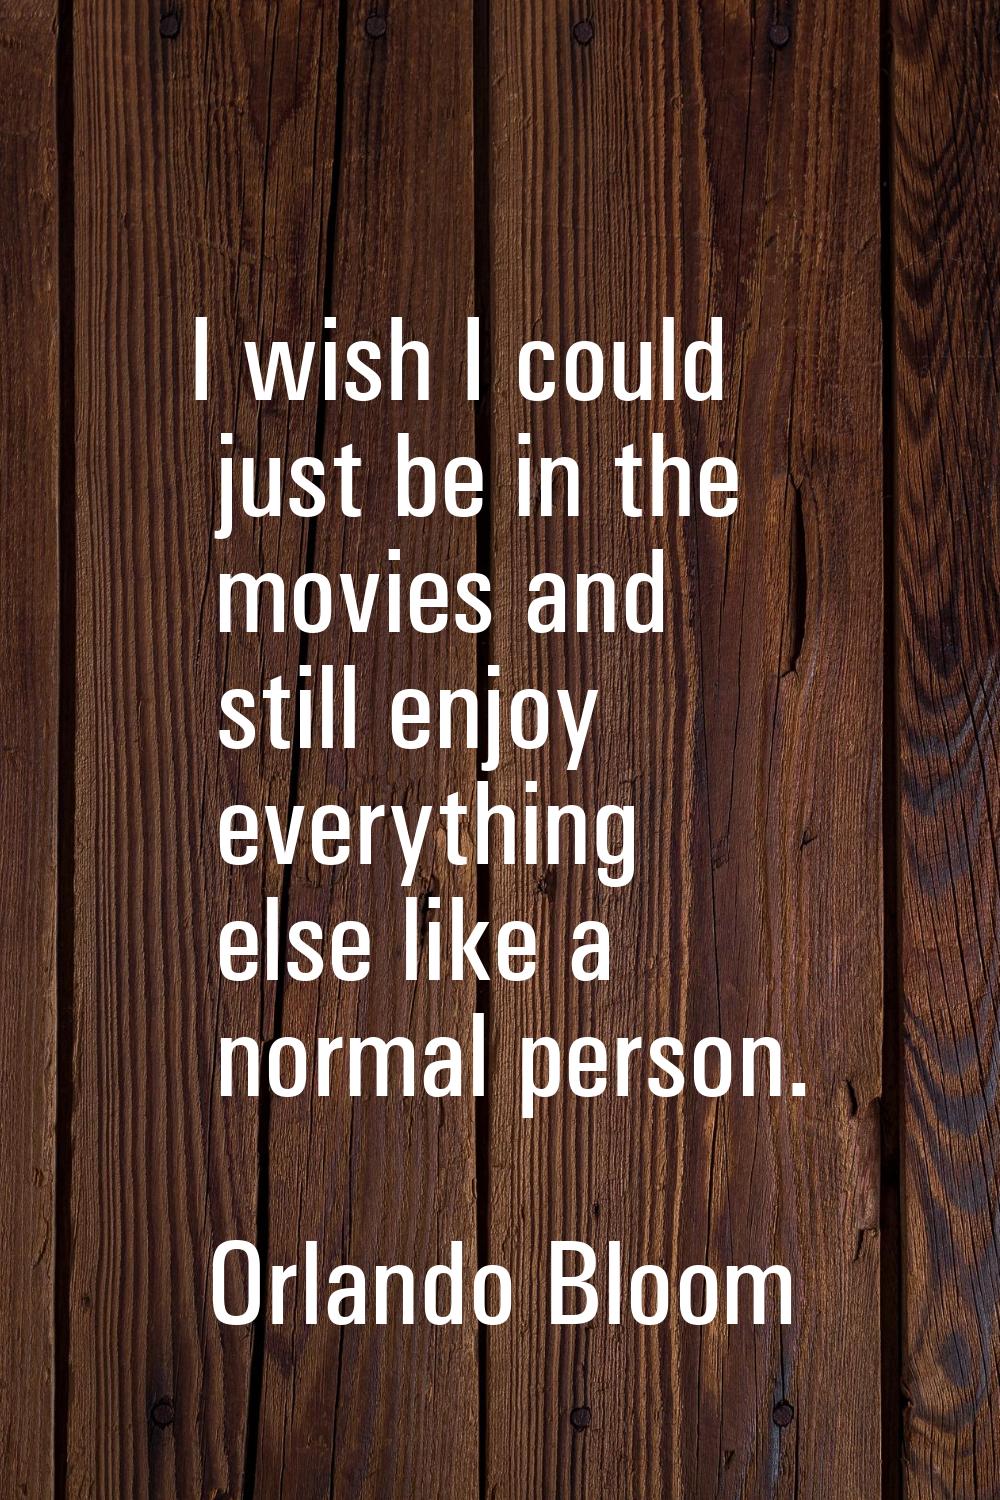 I wish I could just be in the movies and still enjoy everything else like a normal person.